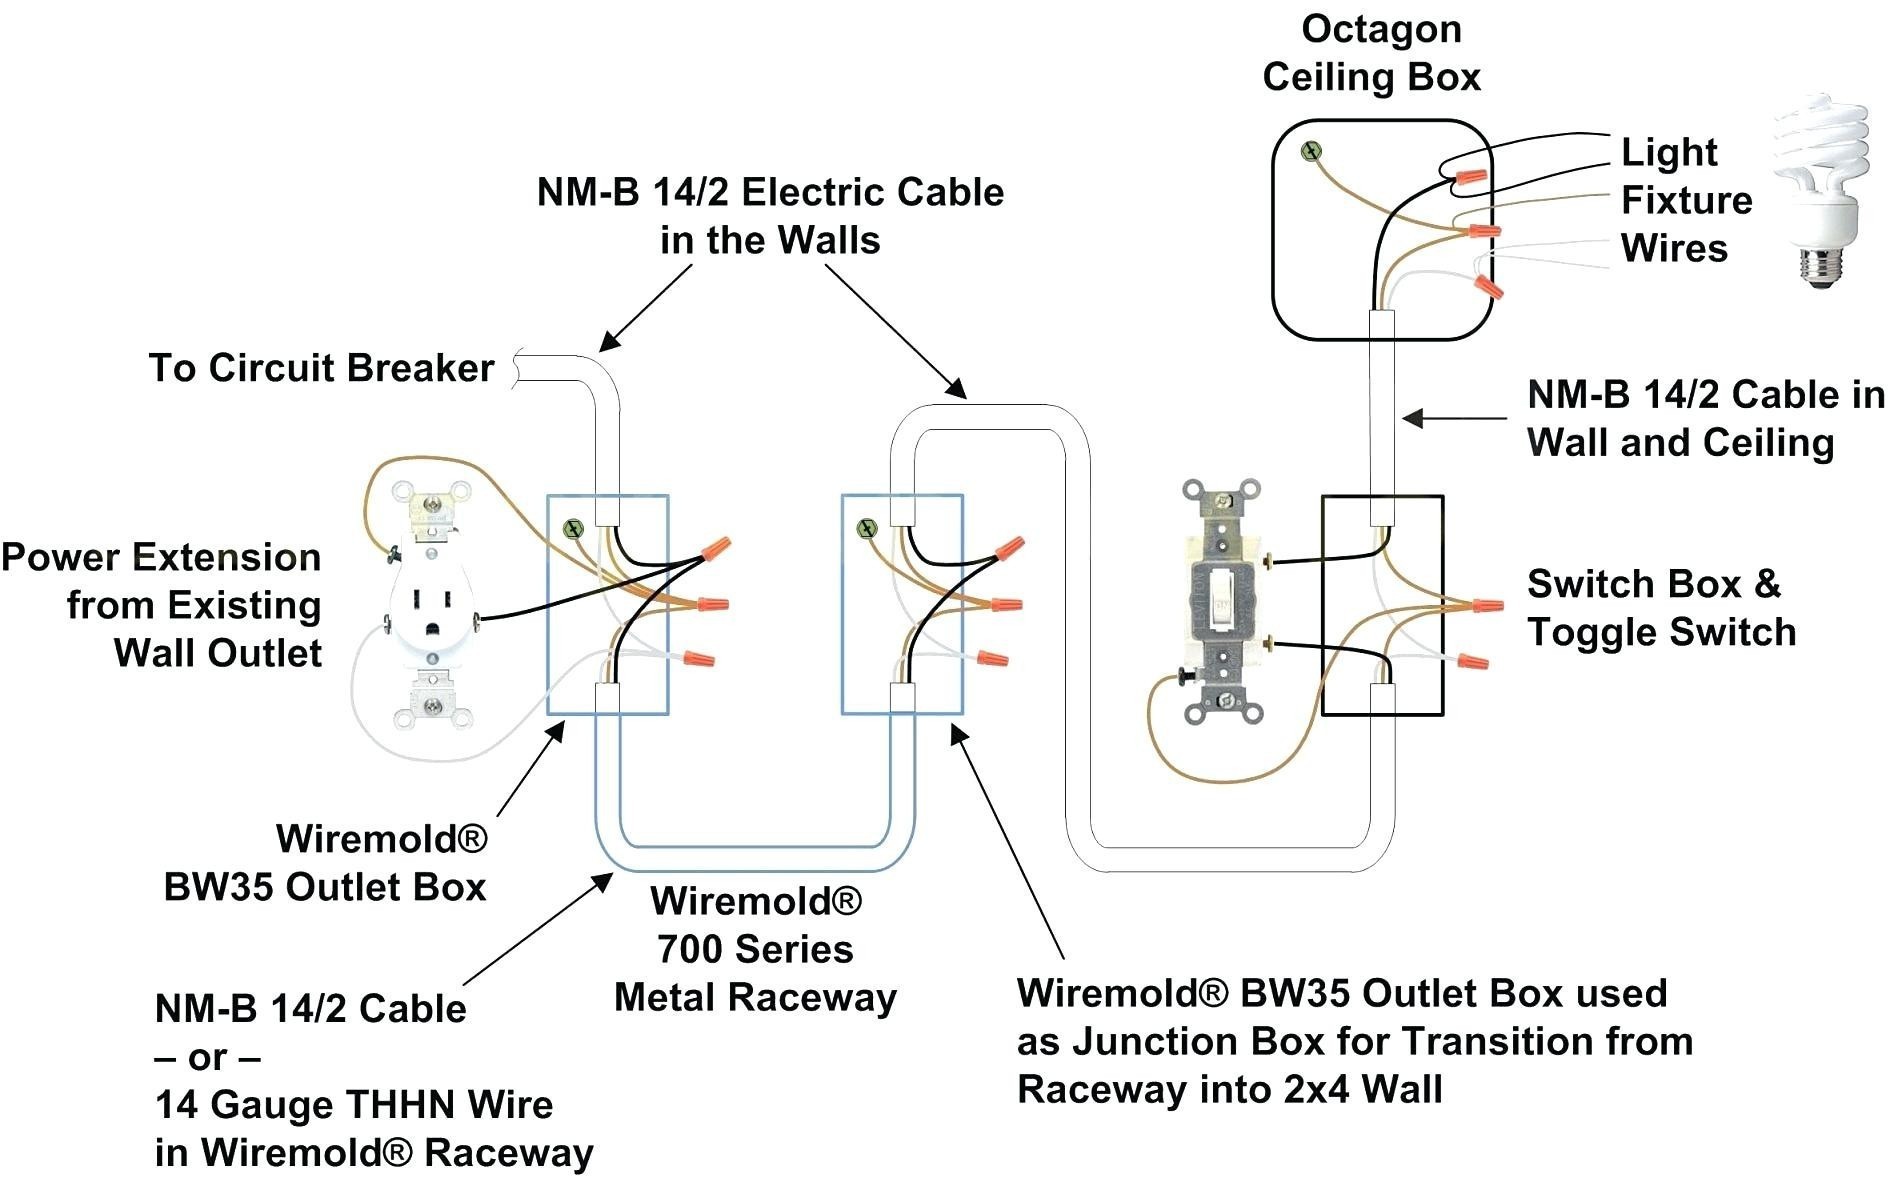 Wiring Diagram Switch Receptacle bination Best Wiring Diagrams for A Gfci Bo Switch Fresh Wiring A